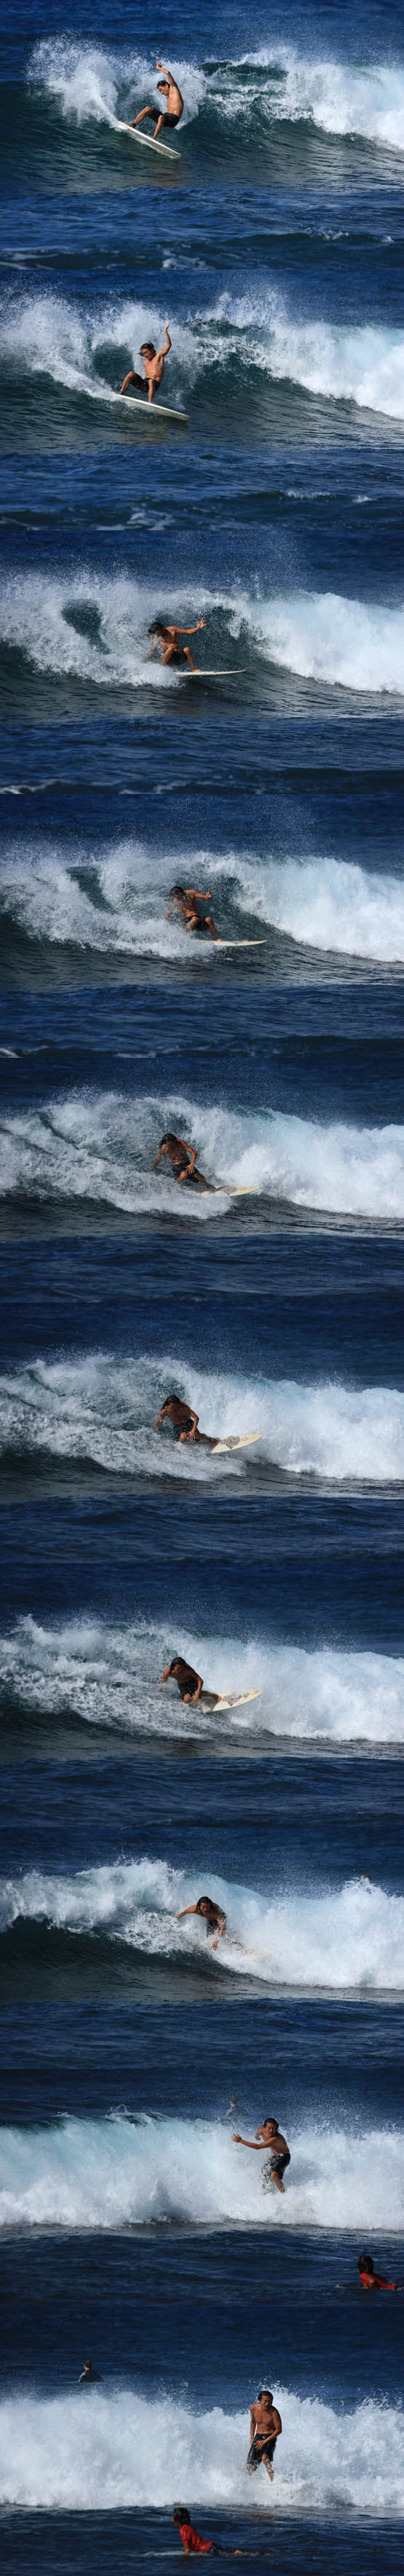 2010_NH_Surfing_sq_T9678